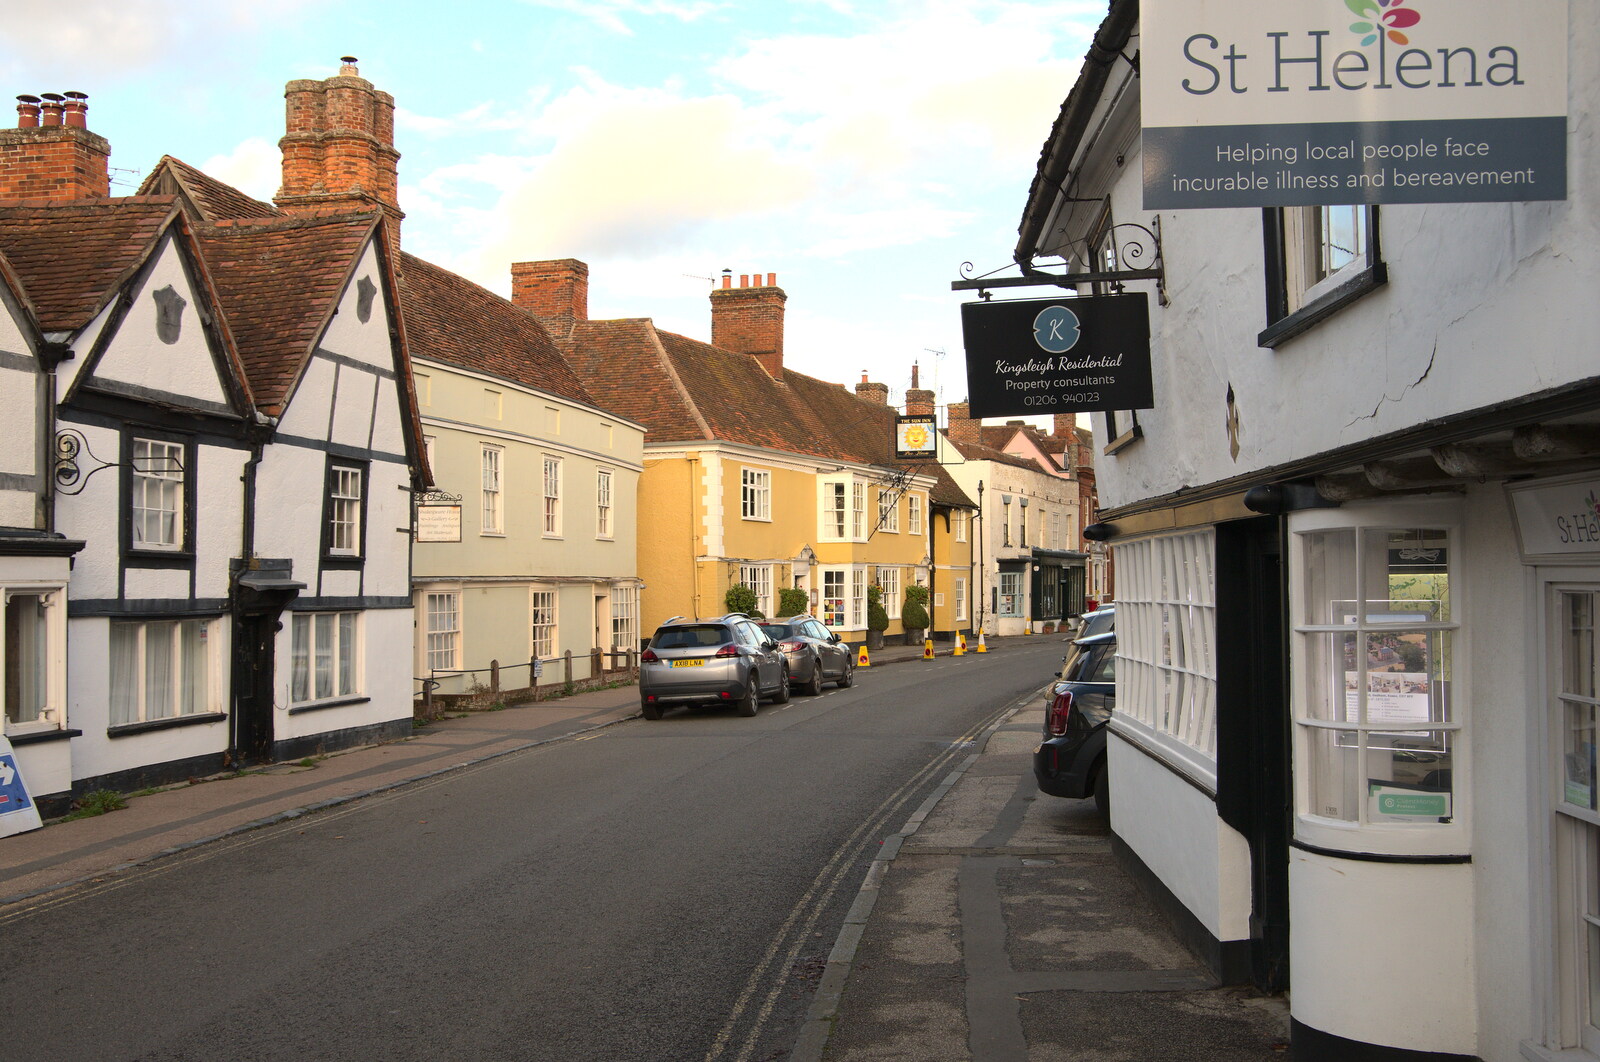 A Postcard from Flatford and Dedham, Suffolk and Essex, 9th November 2022: A bit further down the main street